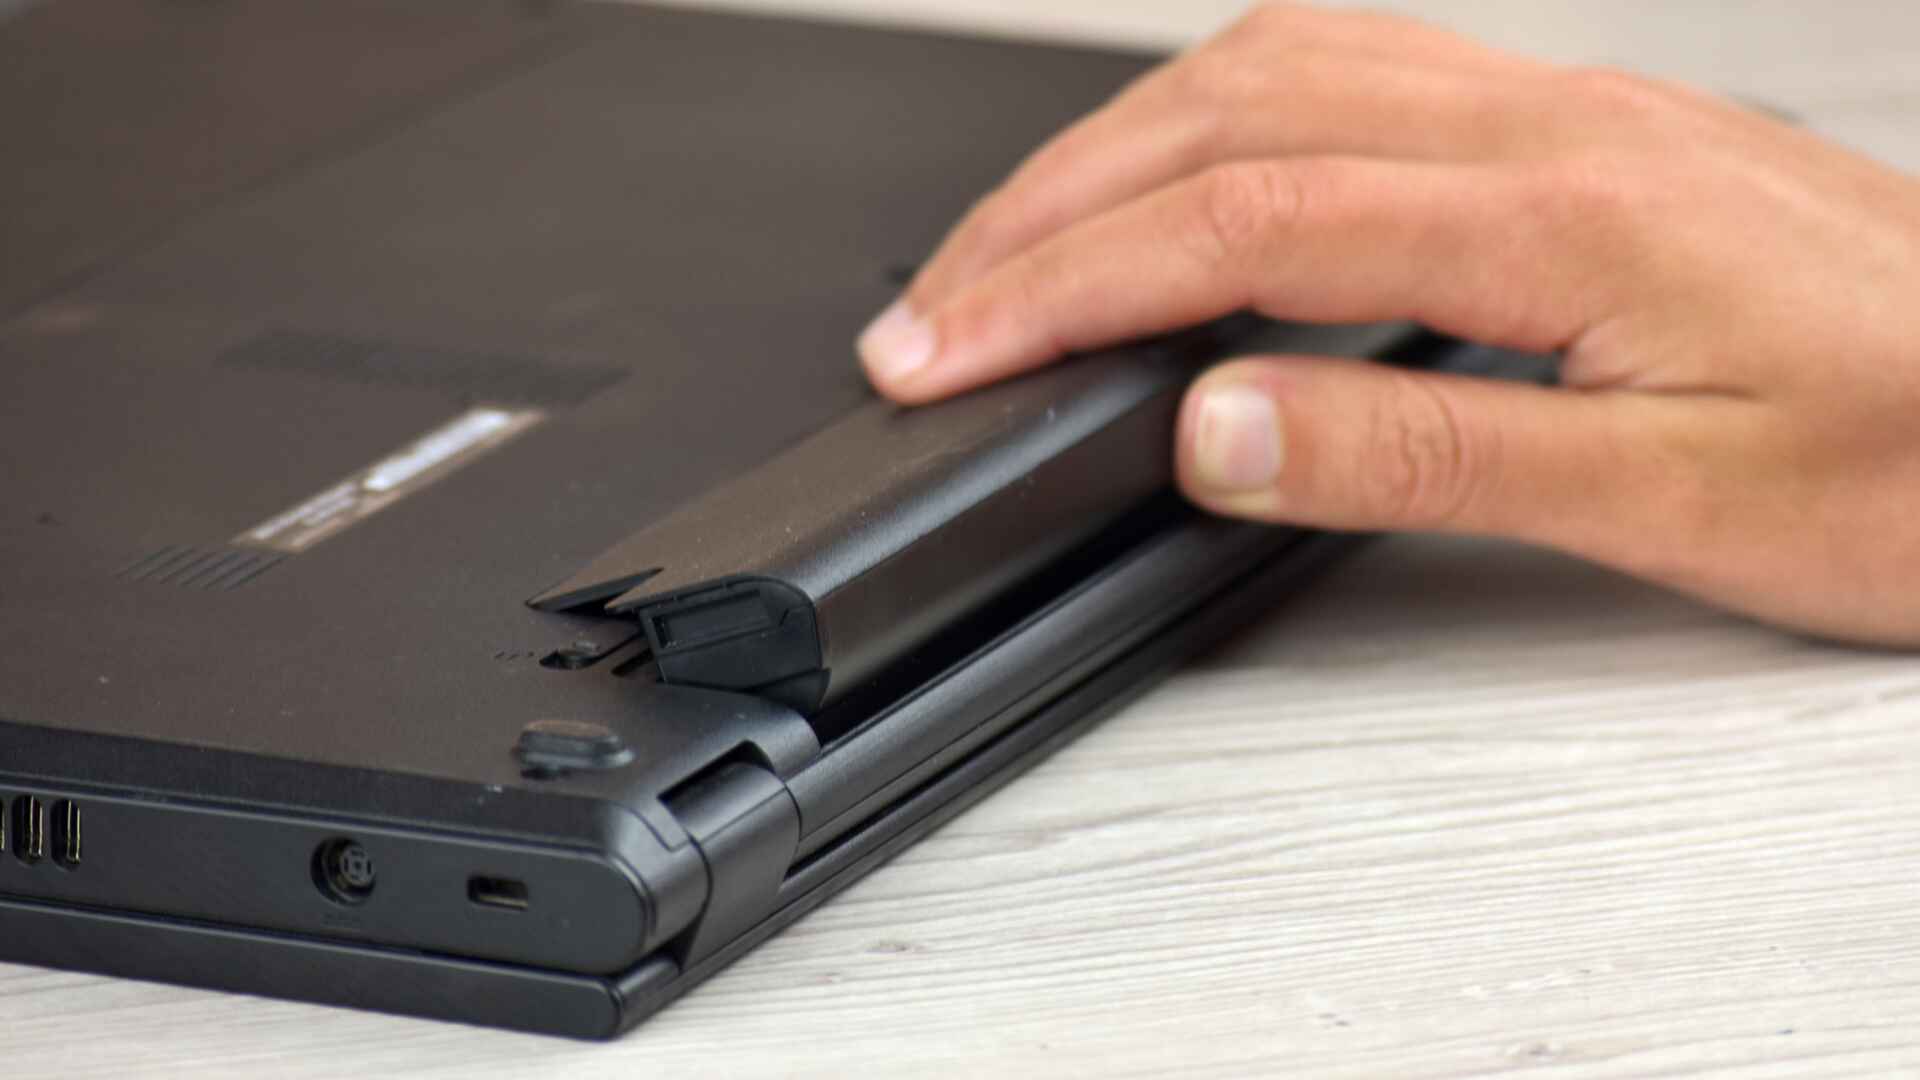 How To Save Battery On Gaming Laptop